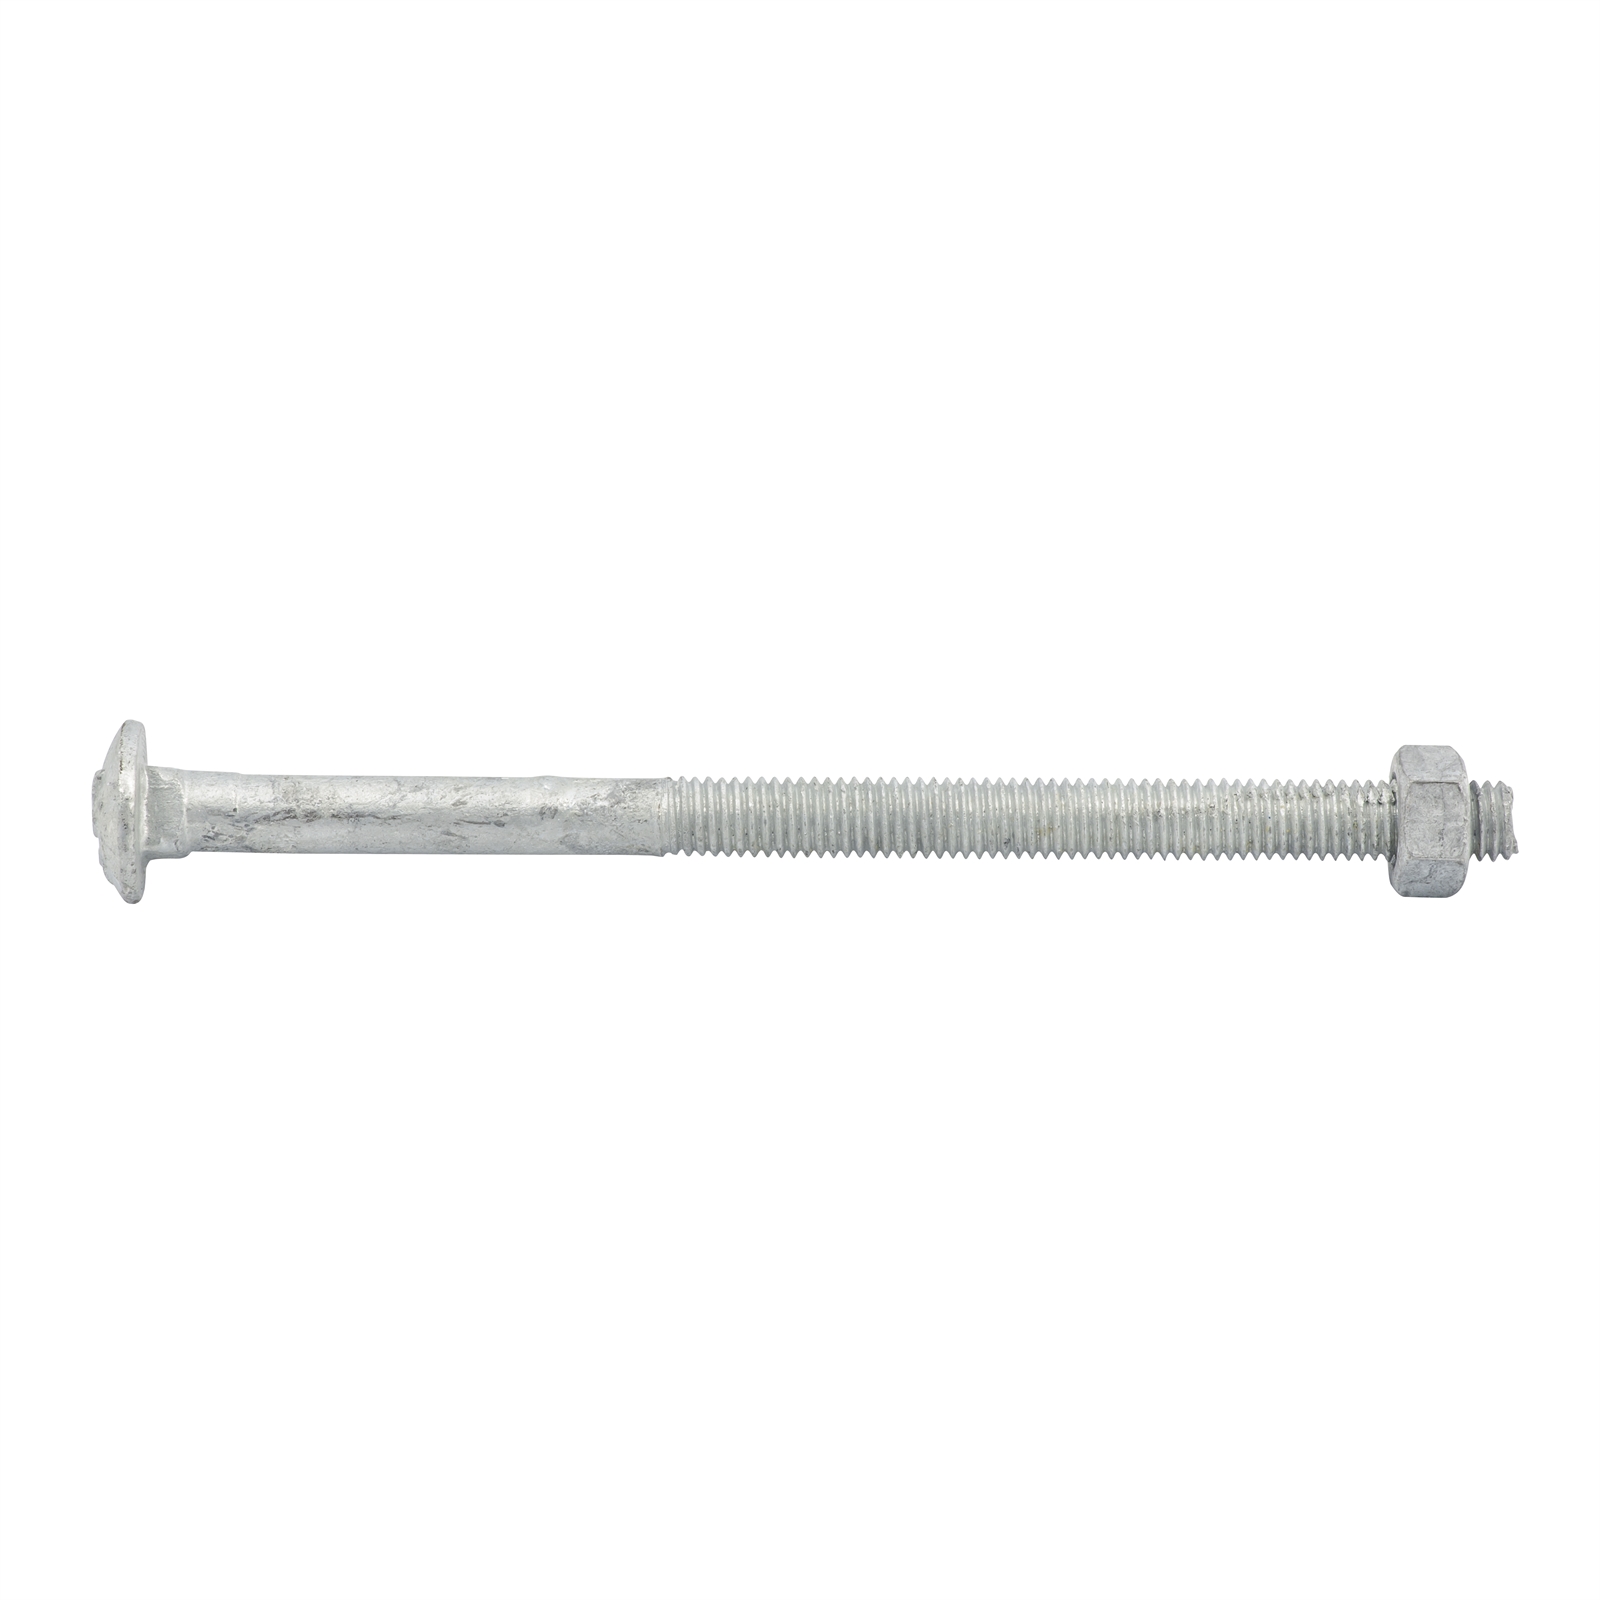 Zenith M8 x 130mm Galvanised Cup Head Bolt and Nut